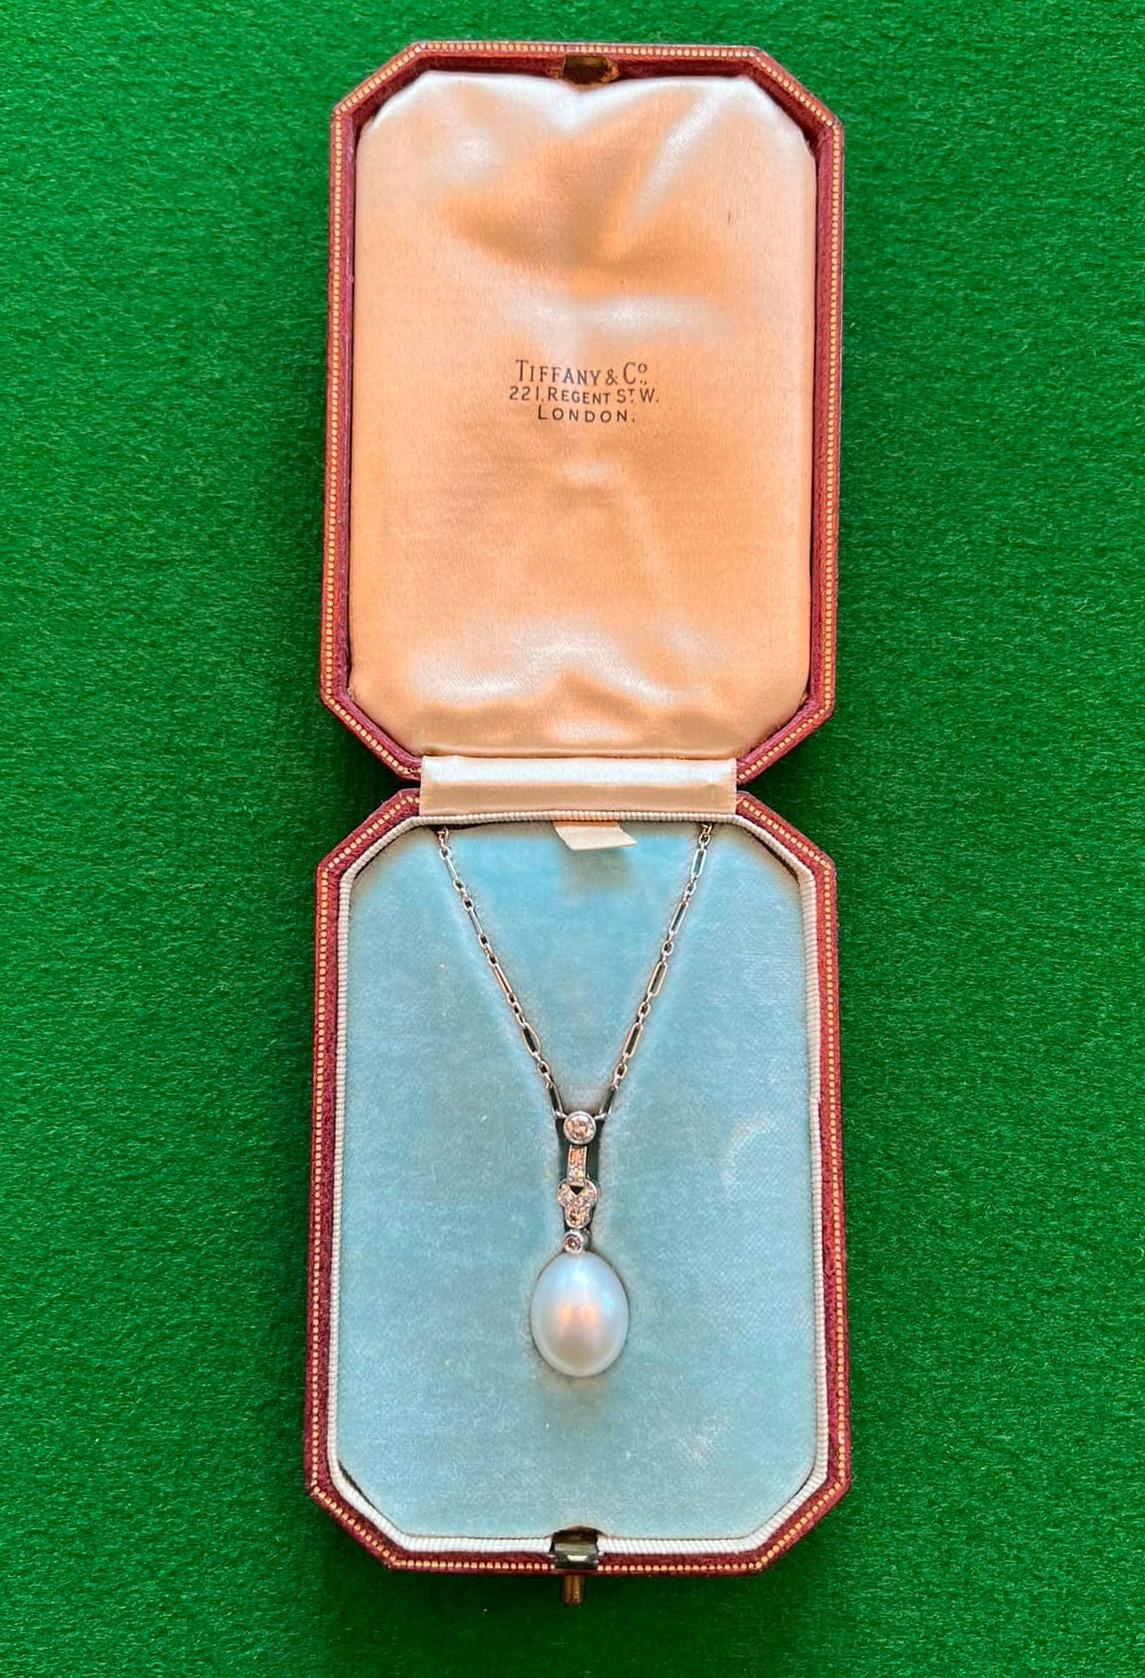 Royal House Antiques

Royal House Antiques is delighted to offer for sale this exquisite circa 1920’s Art Deco Tiffany & Co platinum diamond and pearl pendant necklace

A truly stunning piece, the chain and mounts are both platinum, with multiple